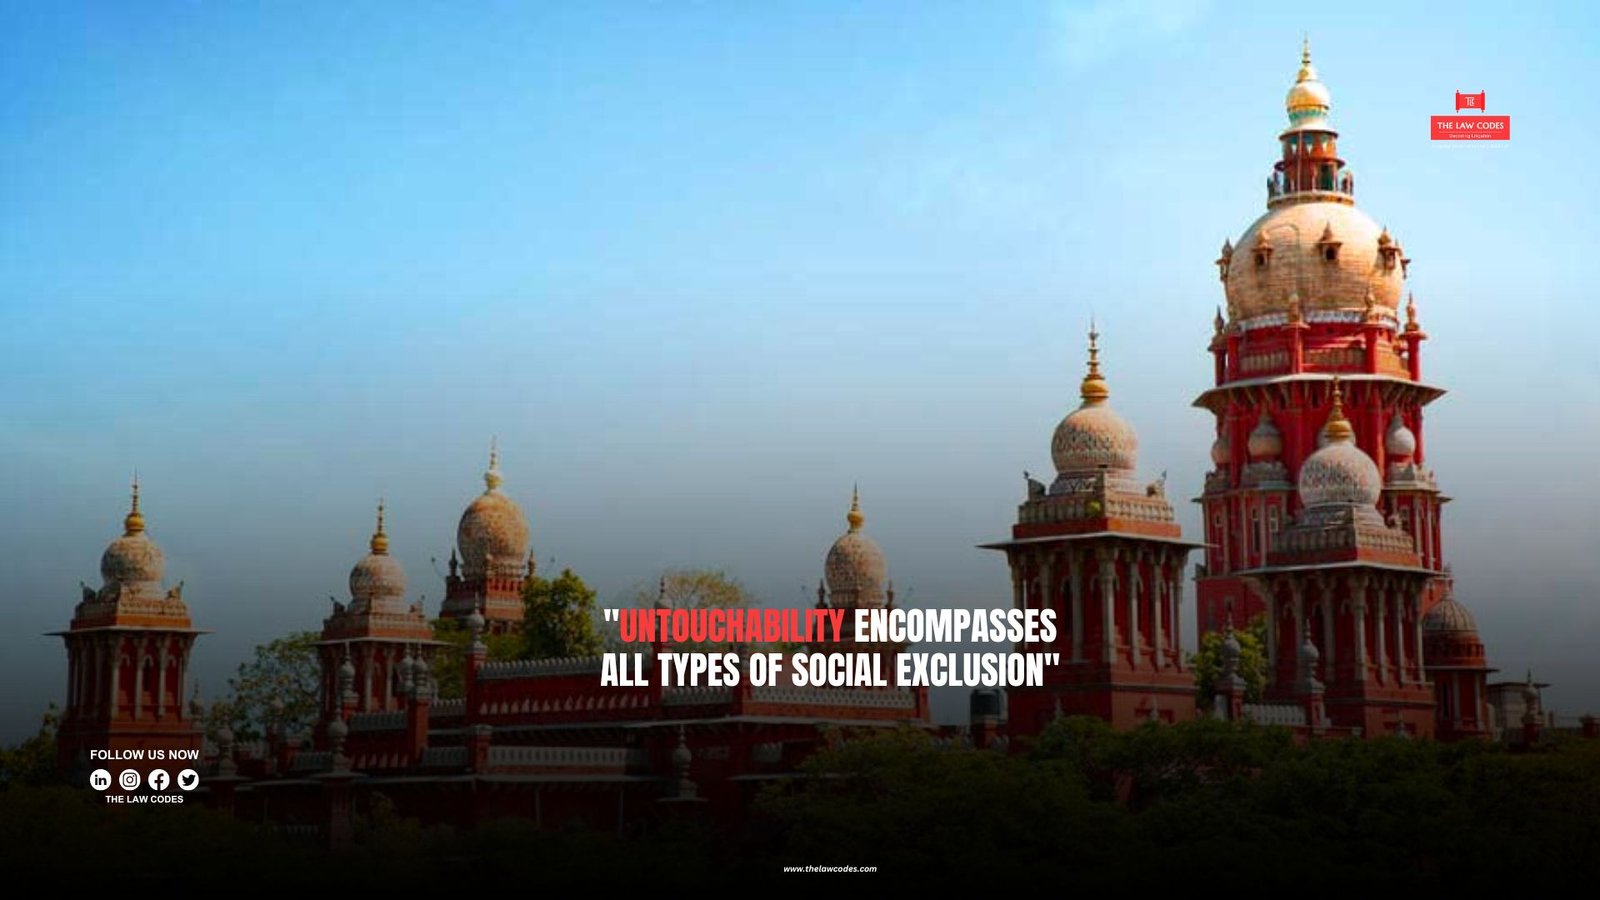 untouchability encompasses all types of social exclusion”